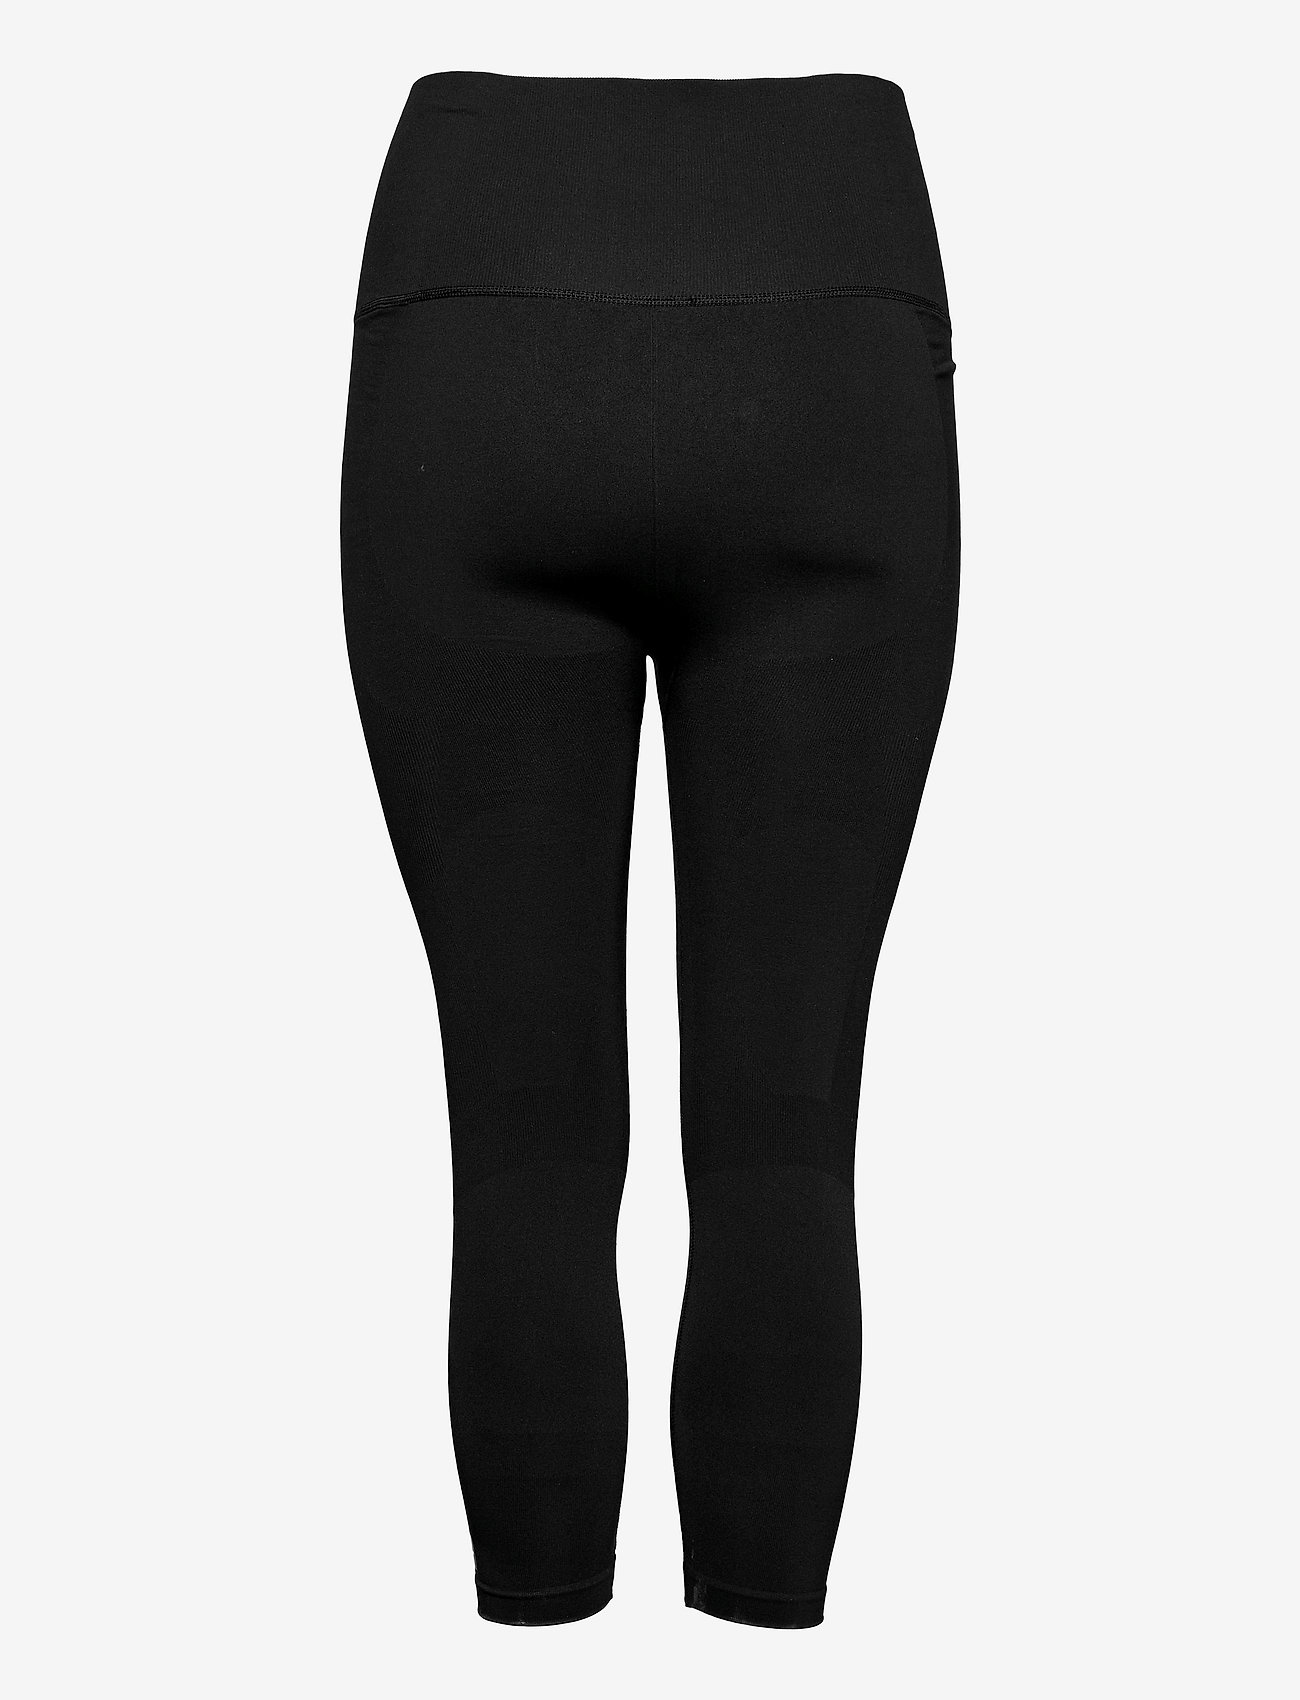 adidas Performance - FORMOTION Sculpt Tights (Plus Size) - compression tights - black - 1